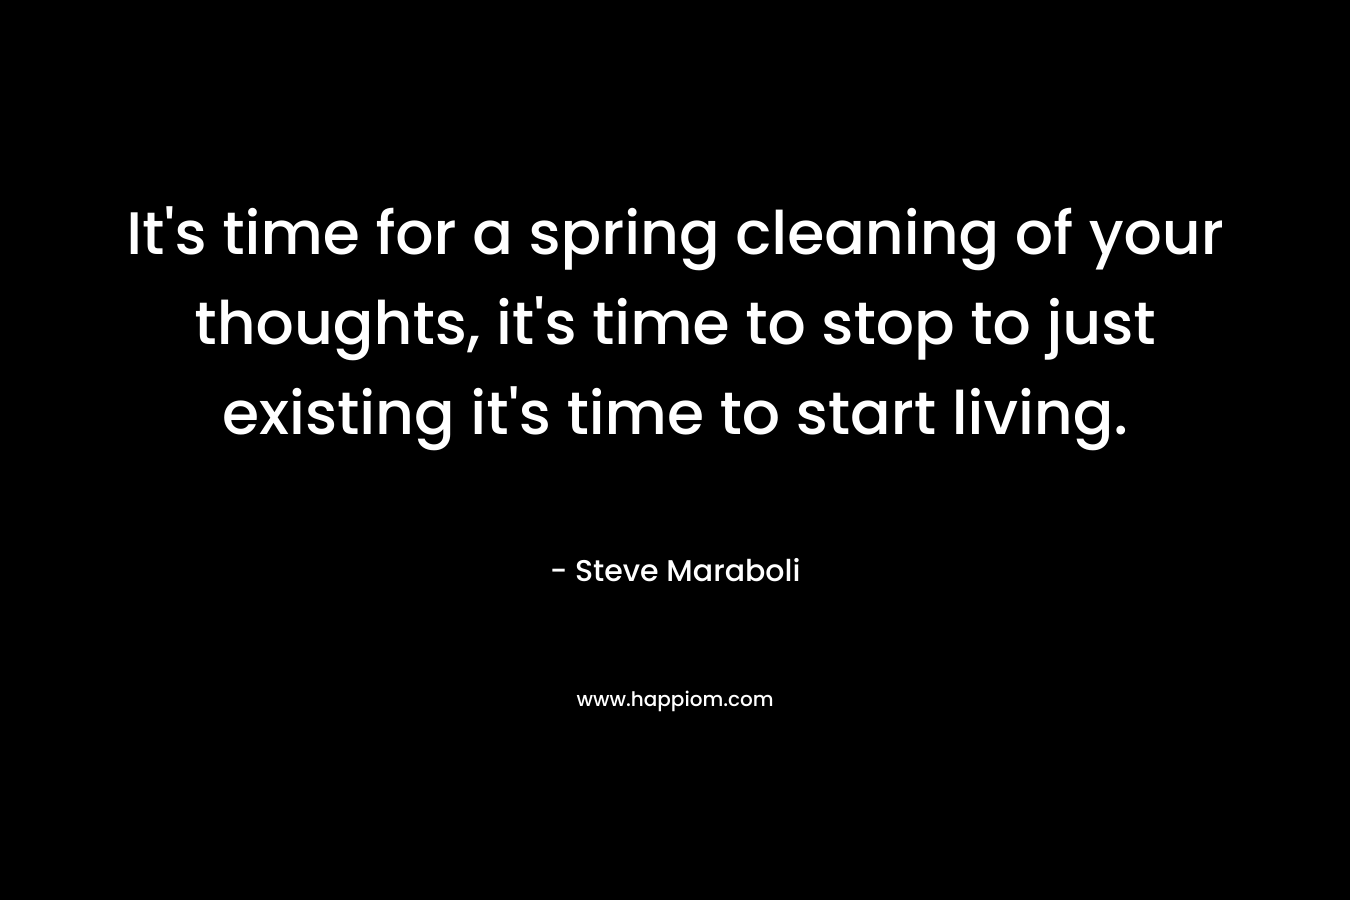 It’s time for a spring cleaning of your thoughts, it’s time to stop to just existing it’s time to start living. – Steve Maraboli